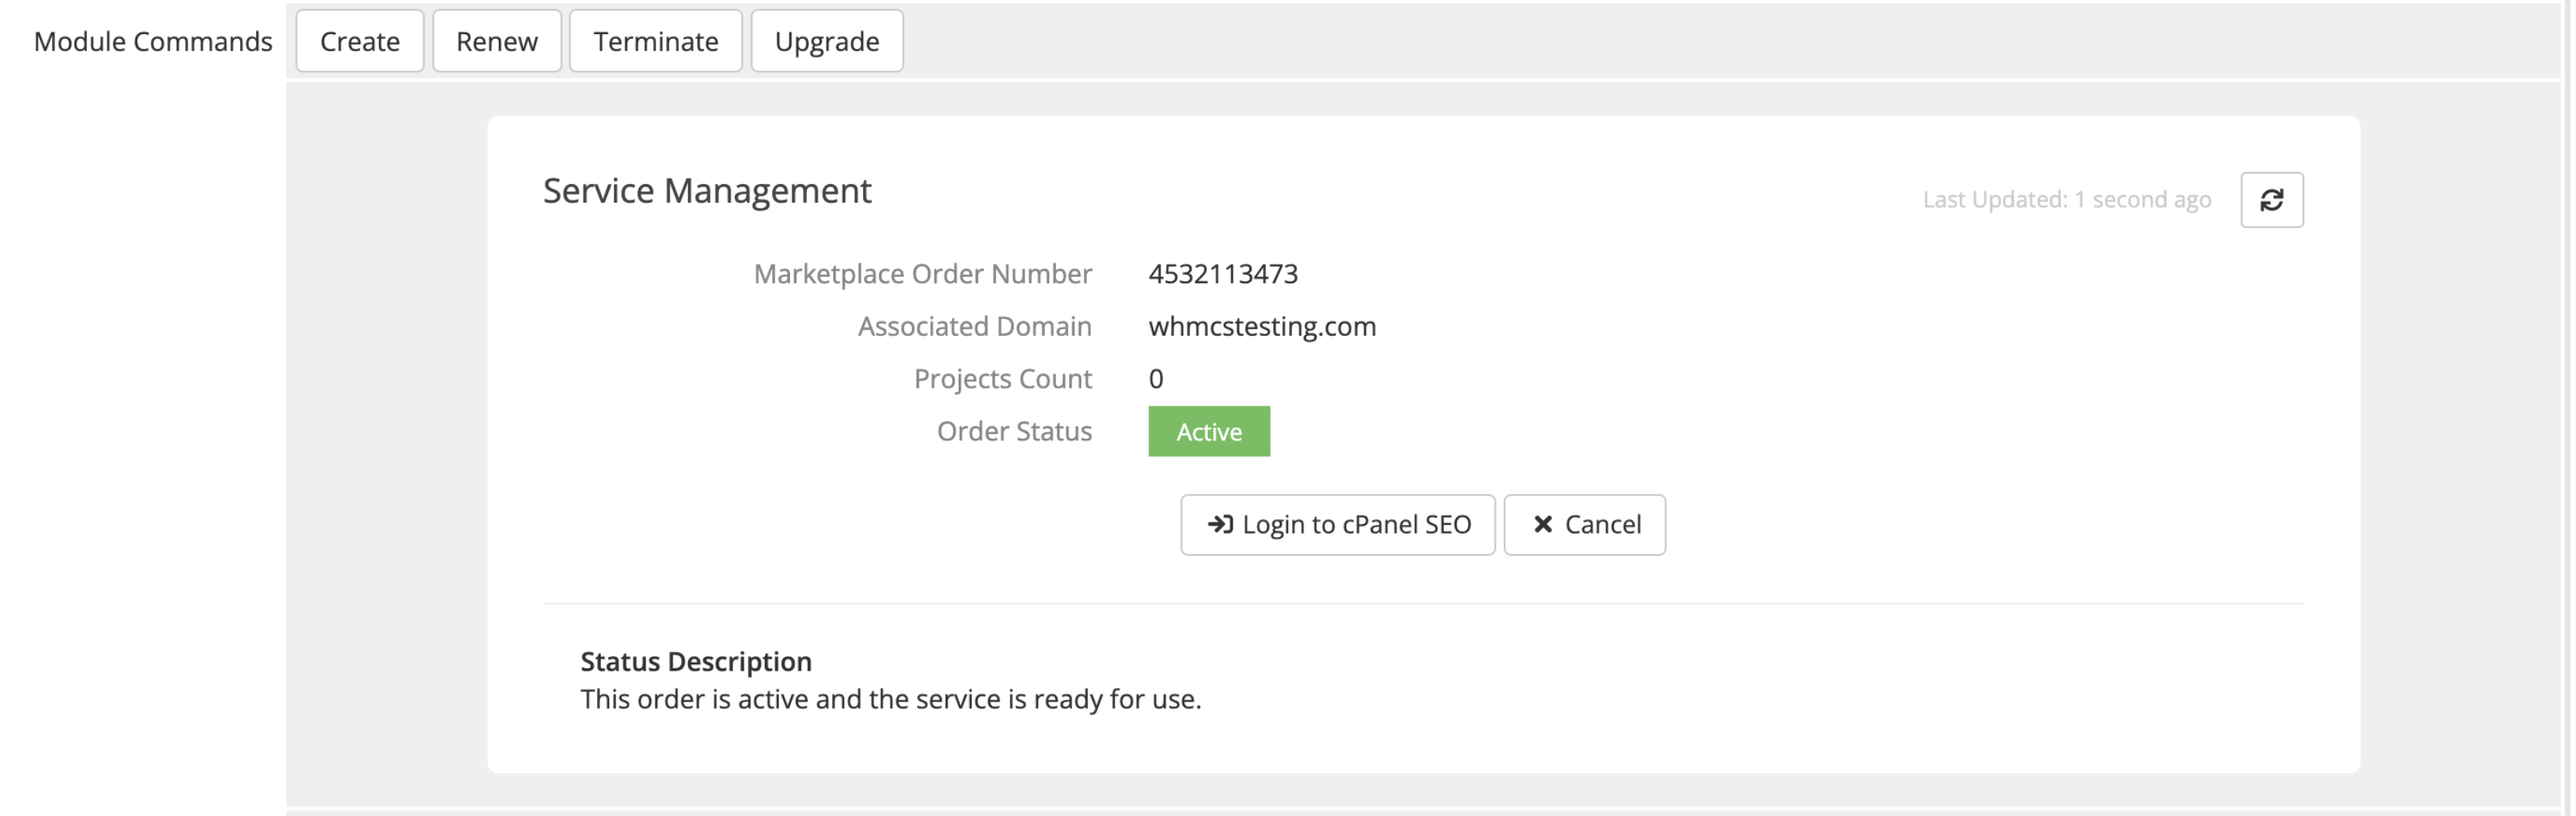 cPanel SEO actions in the client profile